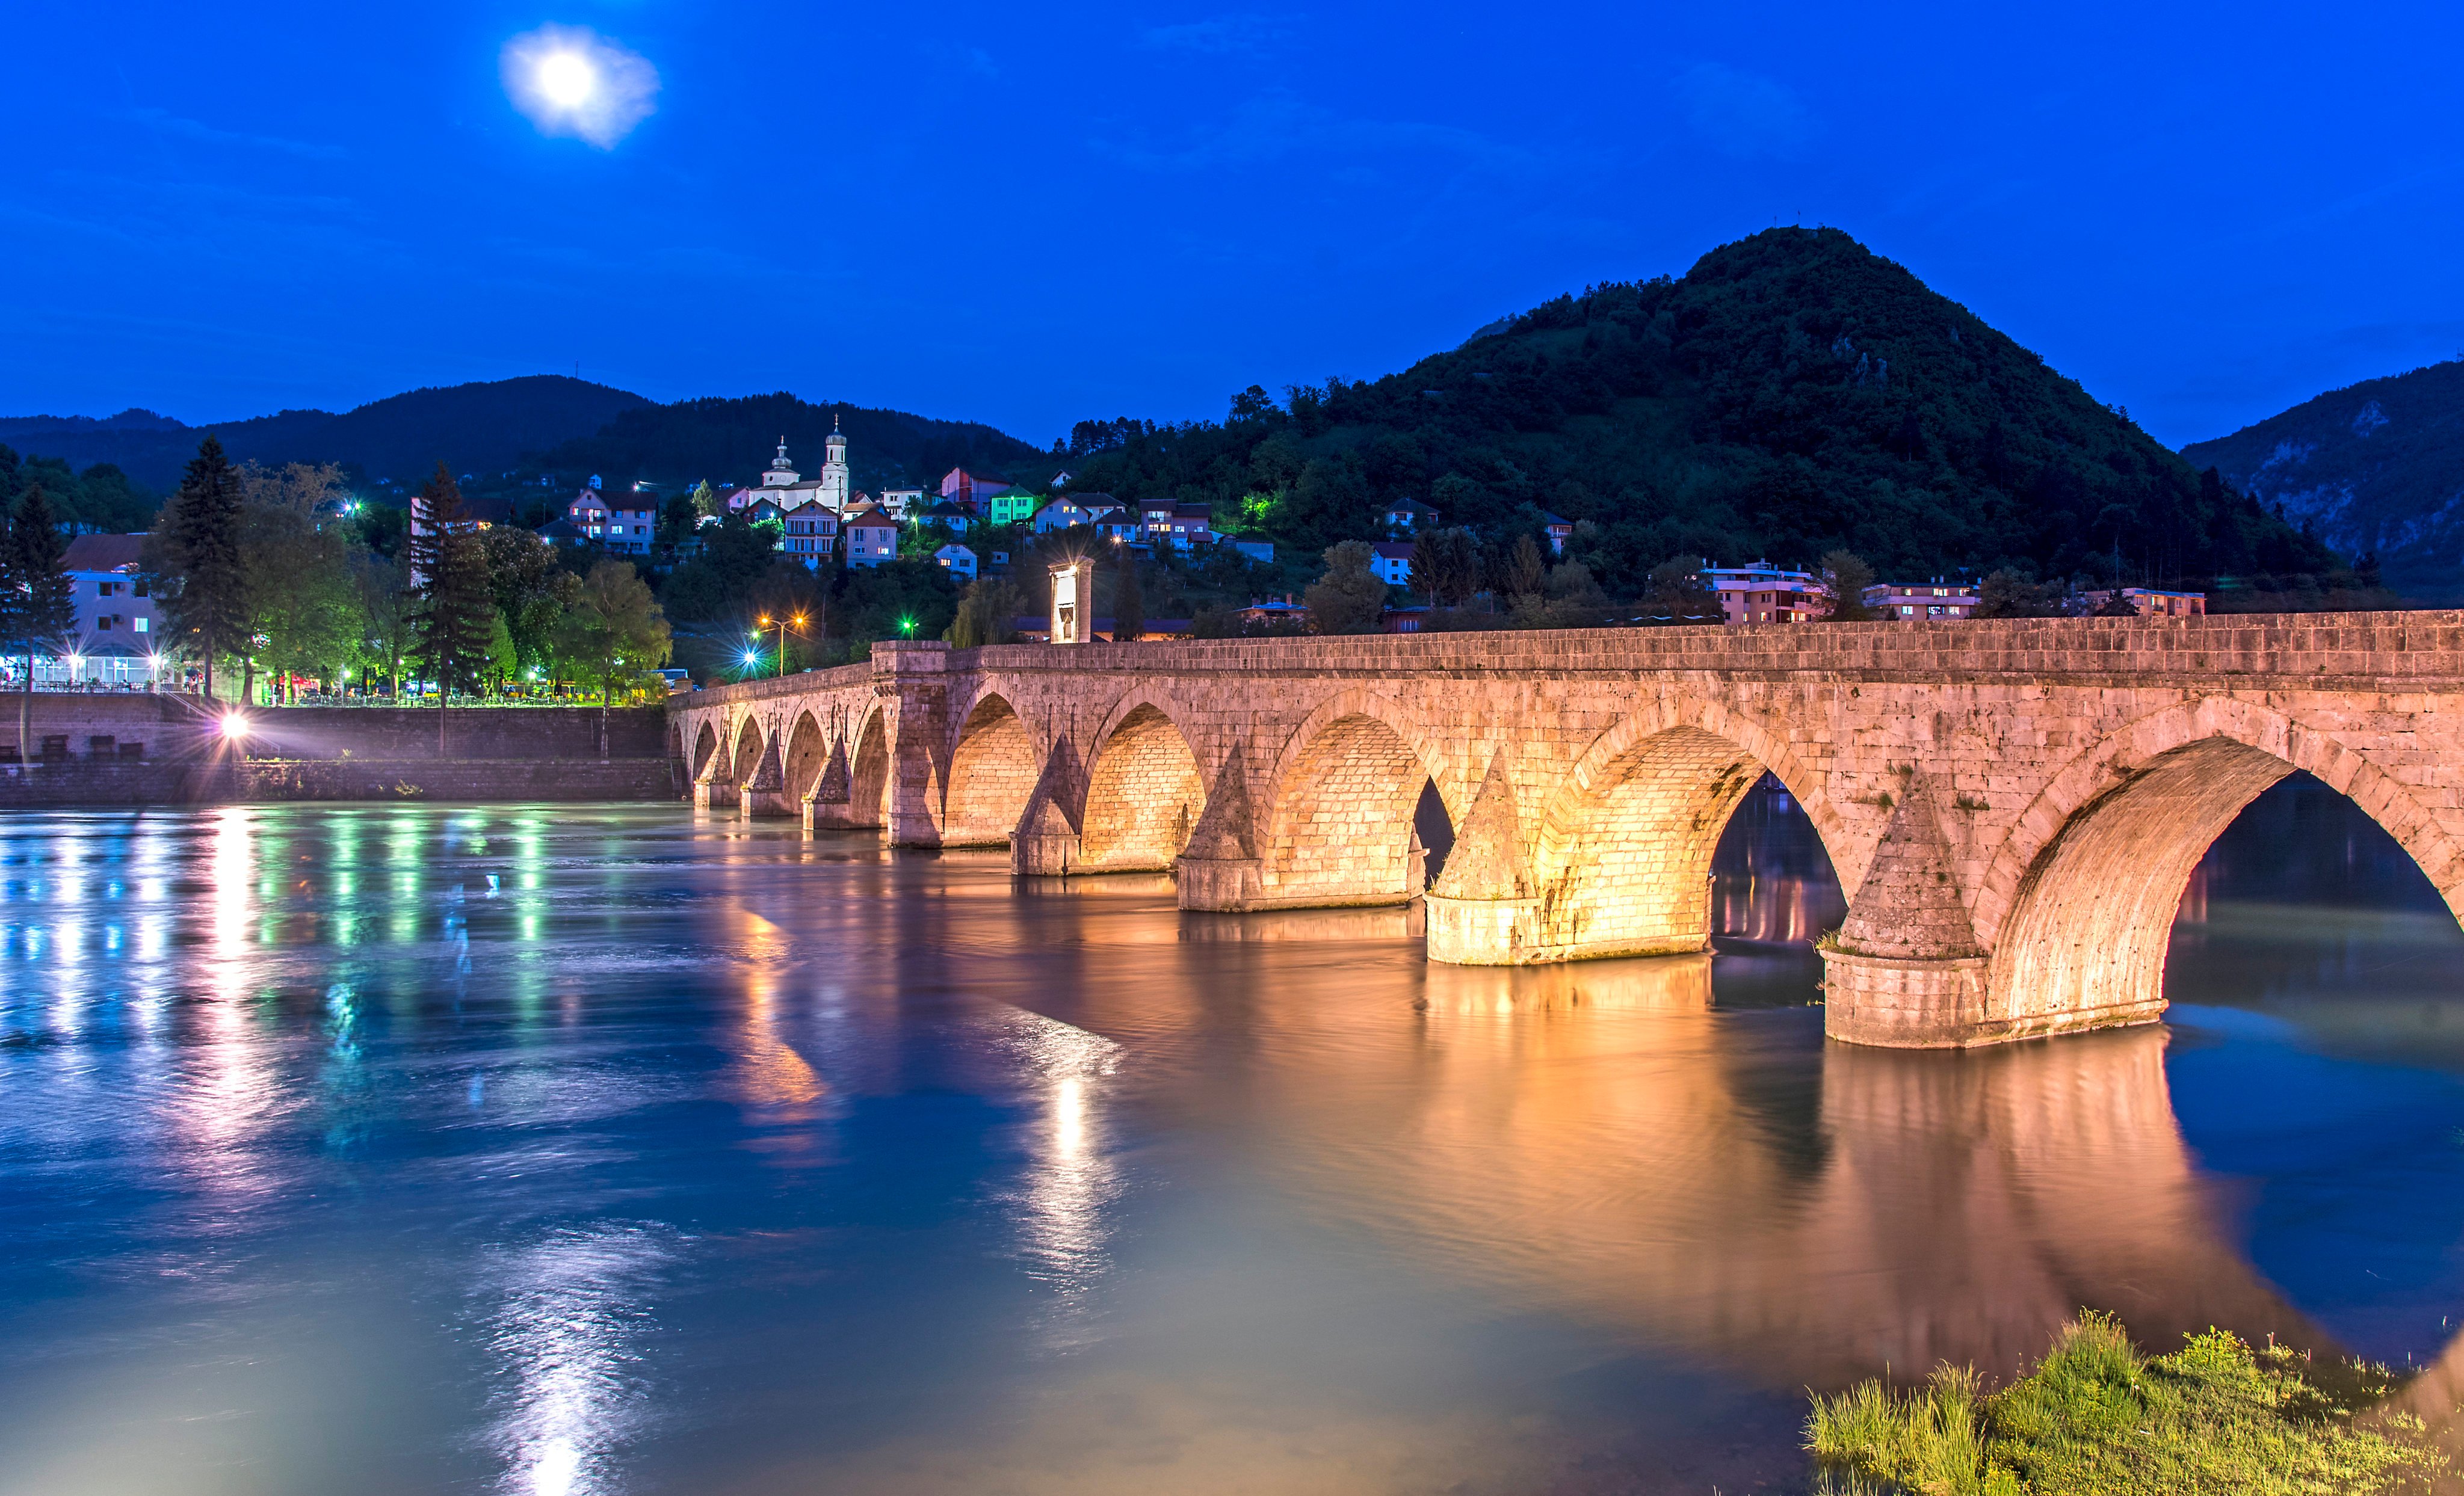 The 16th century bridge in Visegrad in the Republic of Srpska or Bosnia Herzegovina, depending on your point of view. Photo: Tim Pile